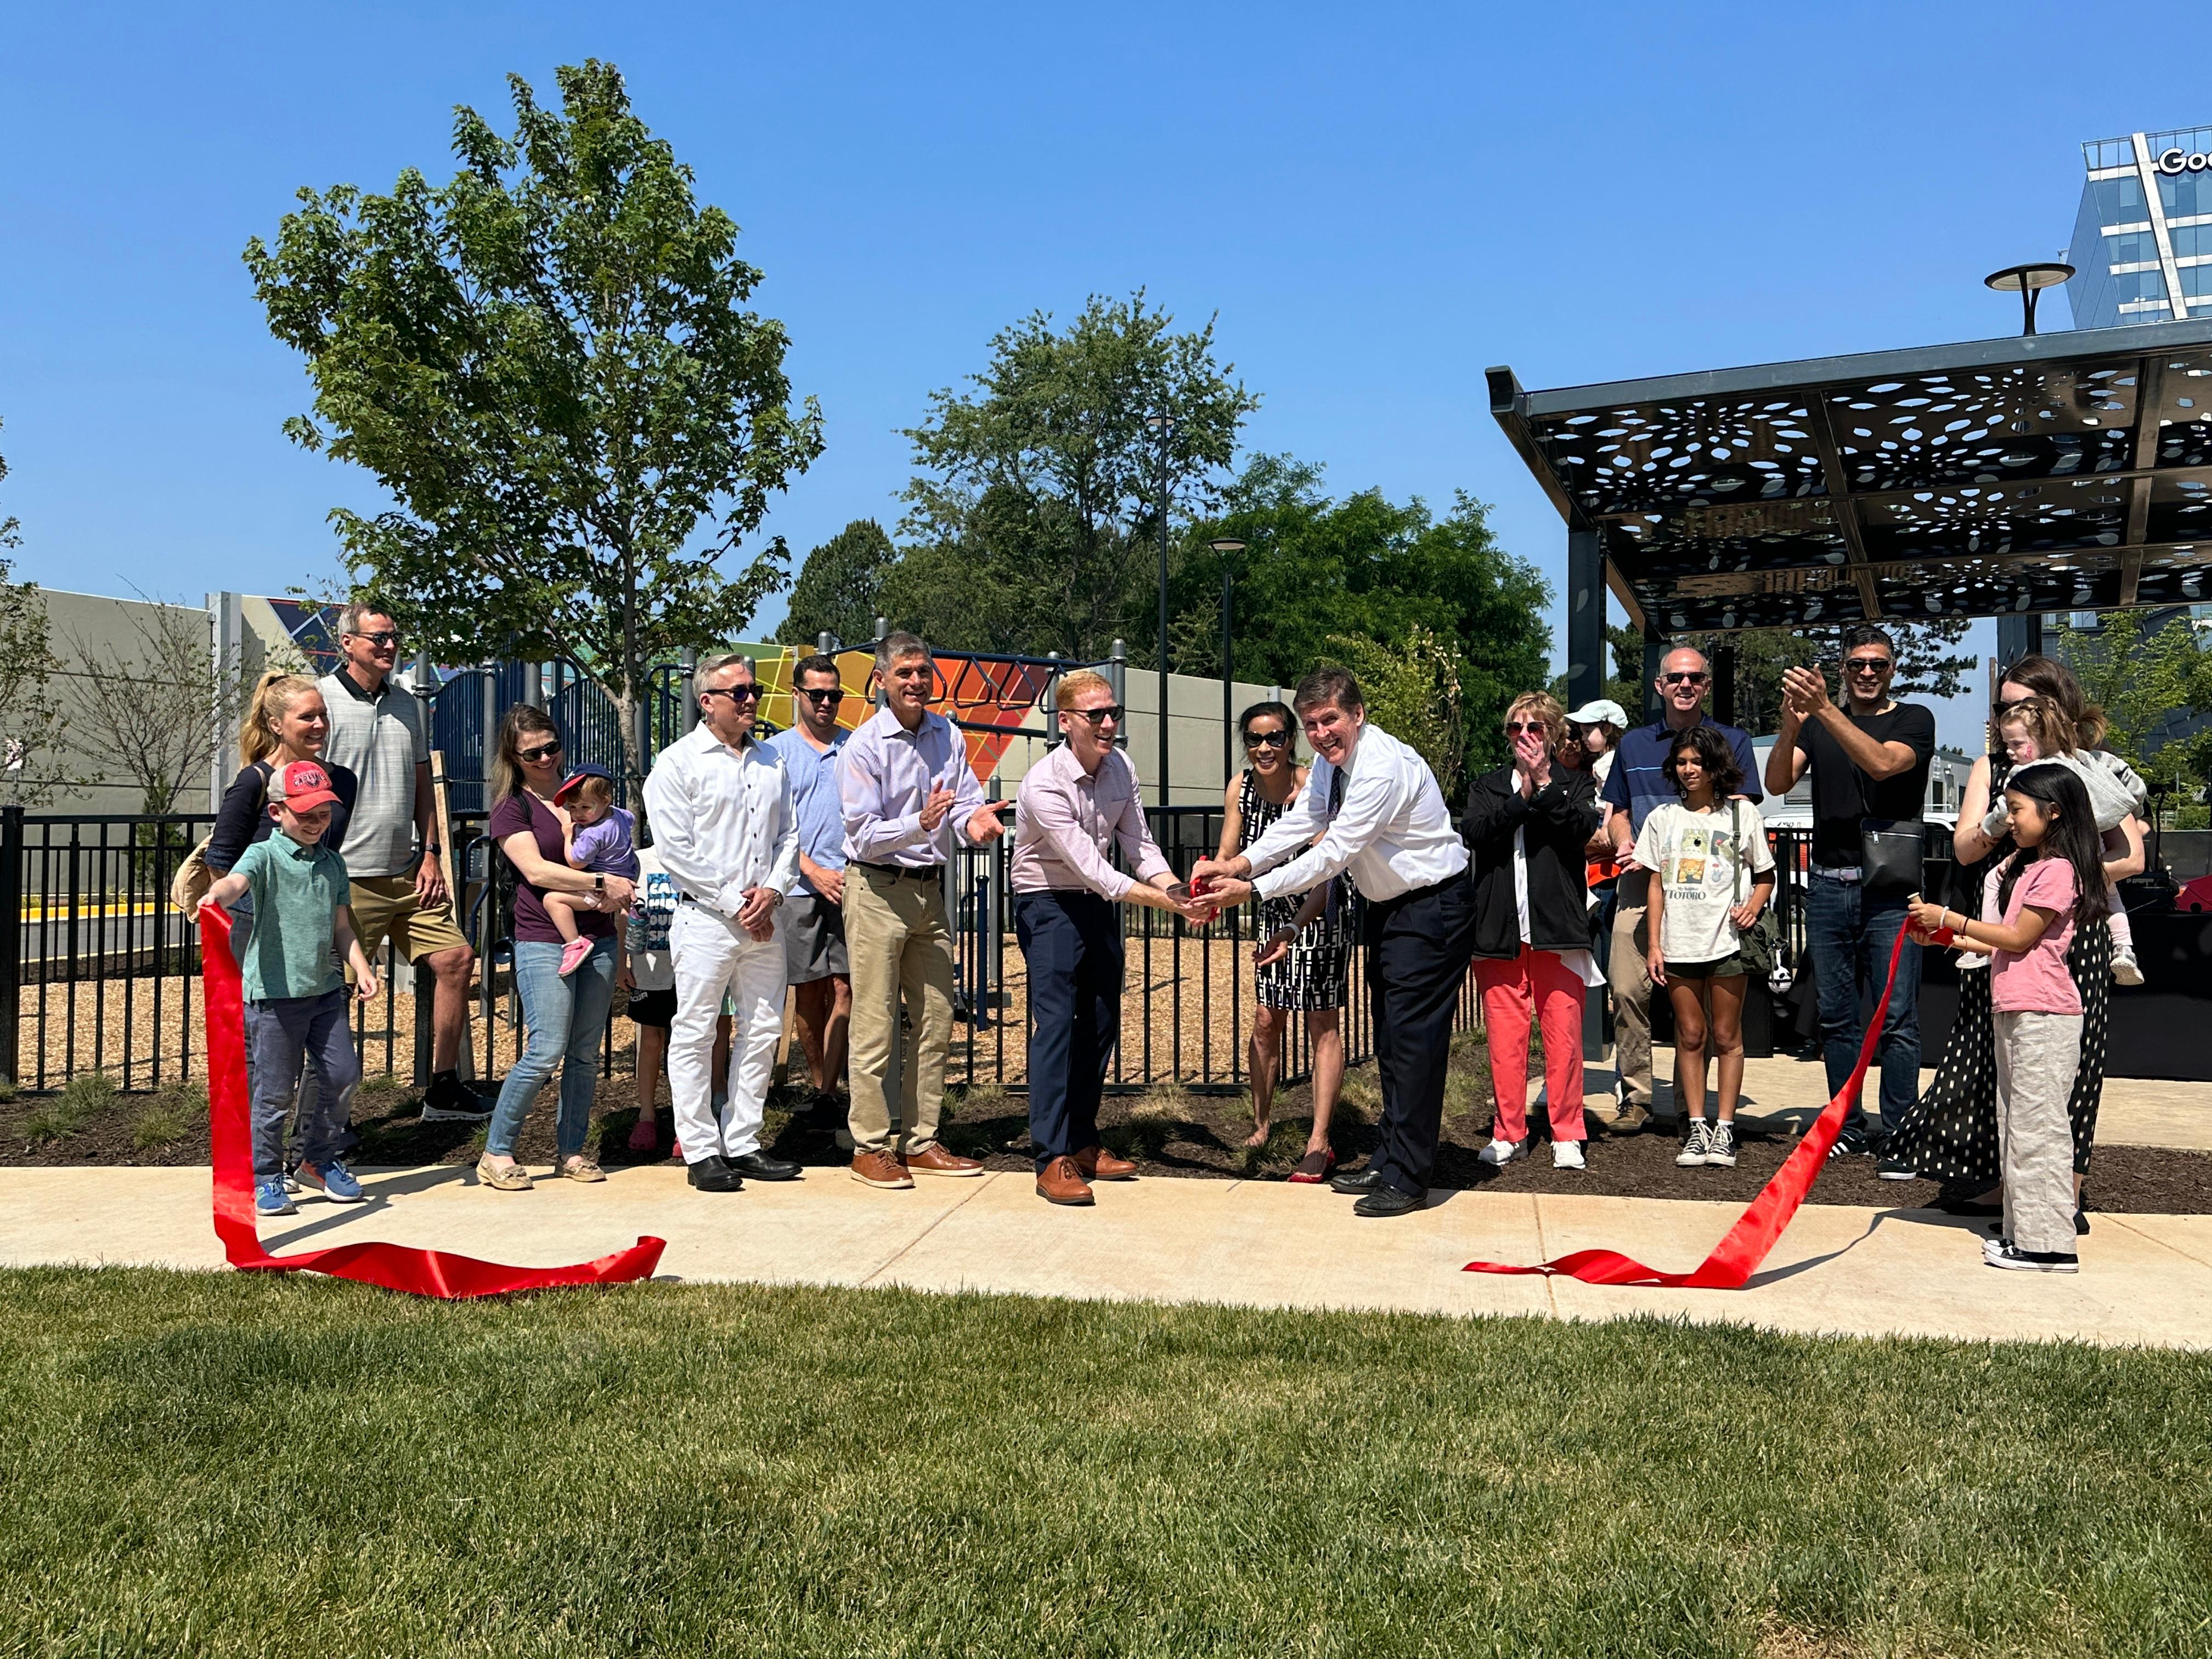 New park and playground: Creating community at The Townhomes at Reston Station